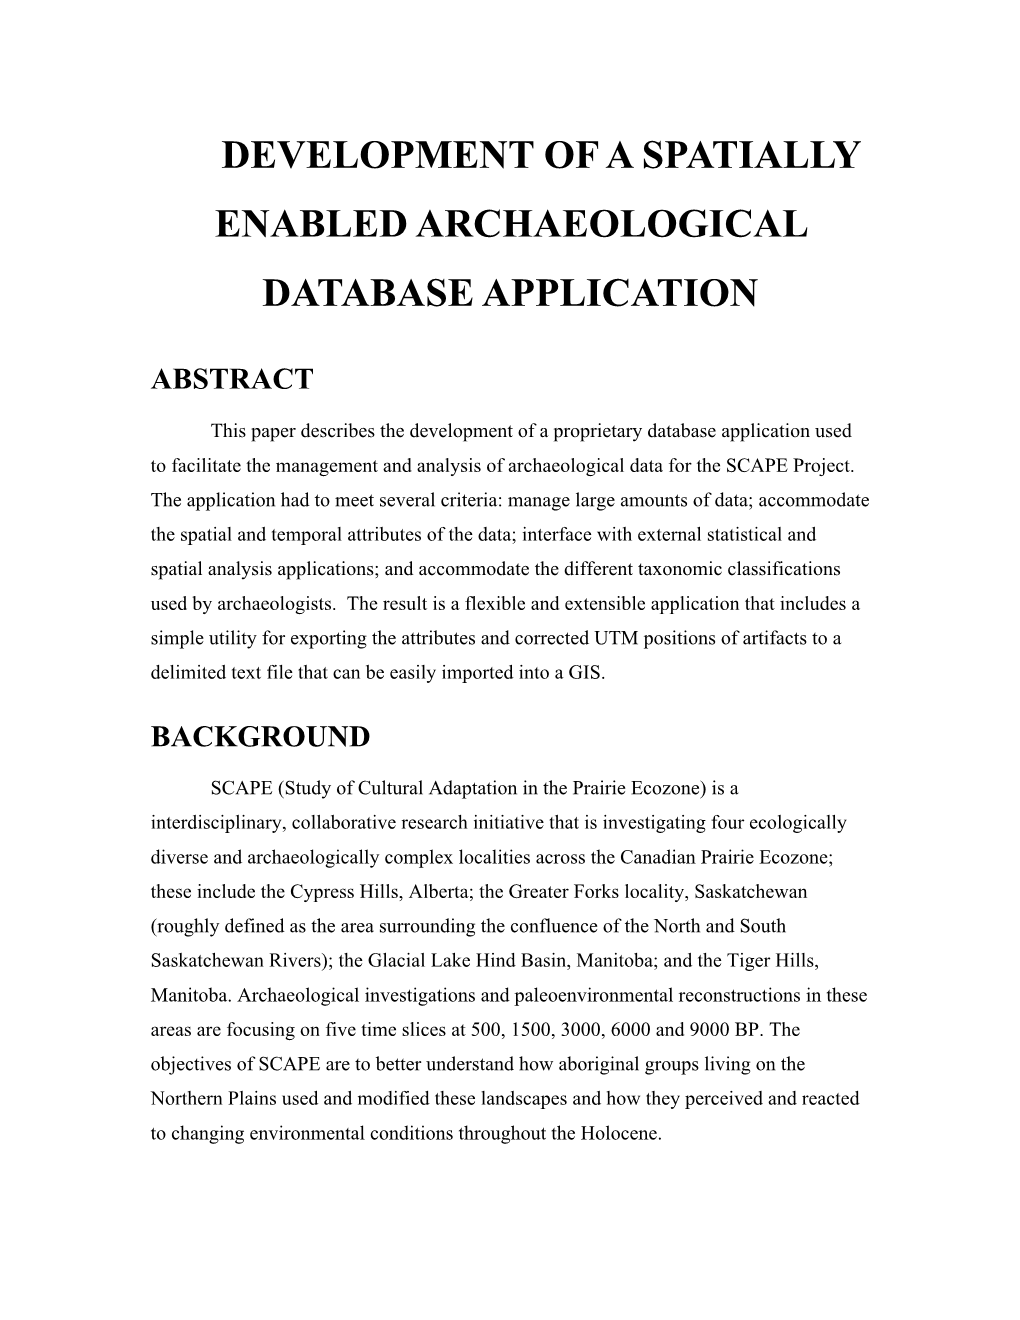 Development of a Spatially Enabled Archaeological Database Application